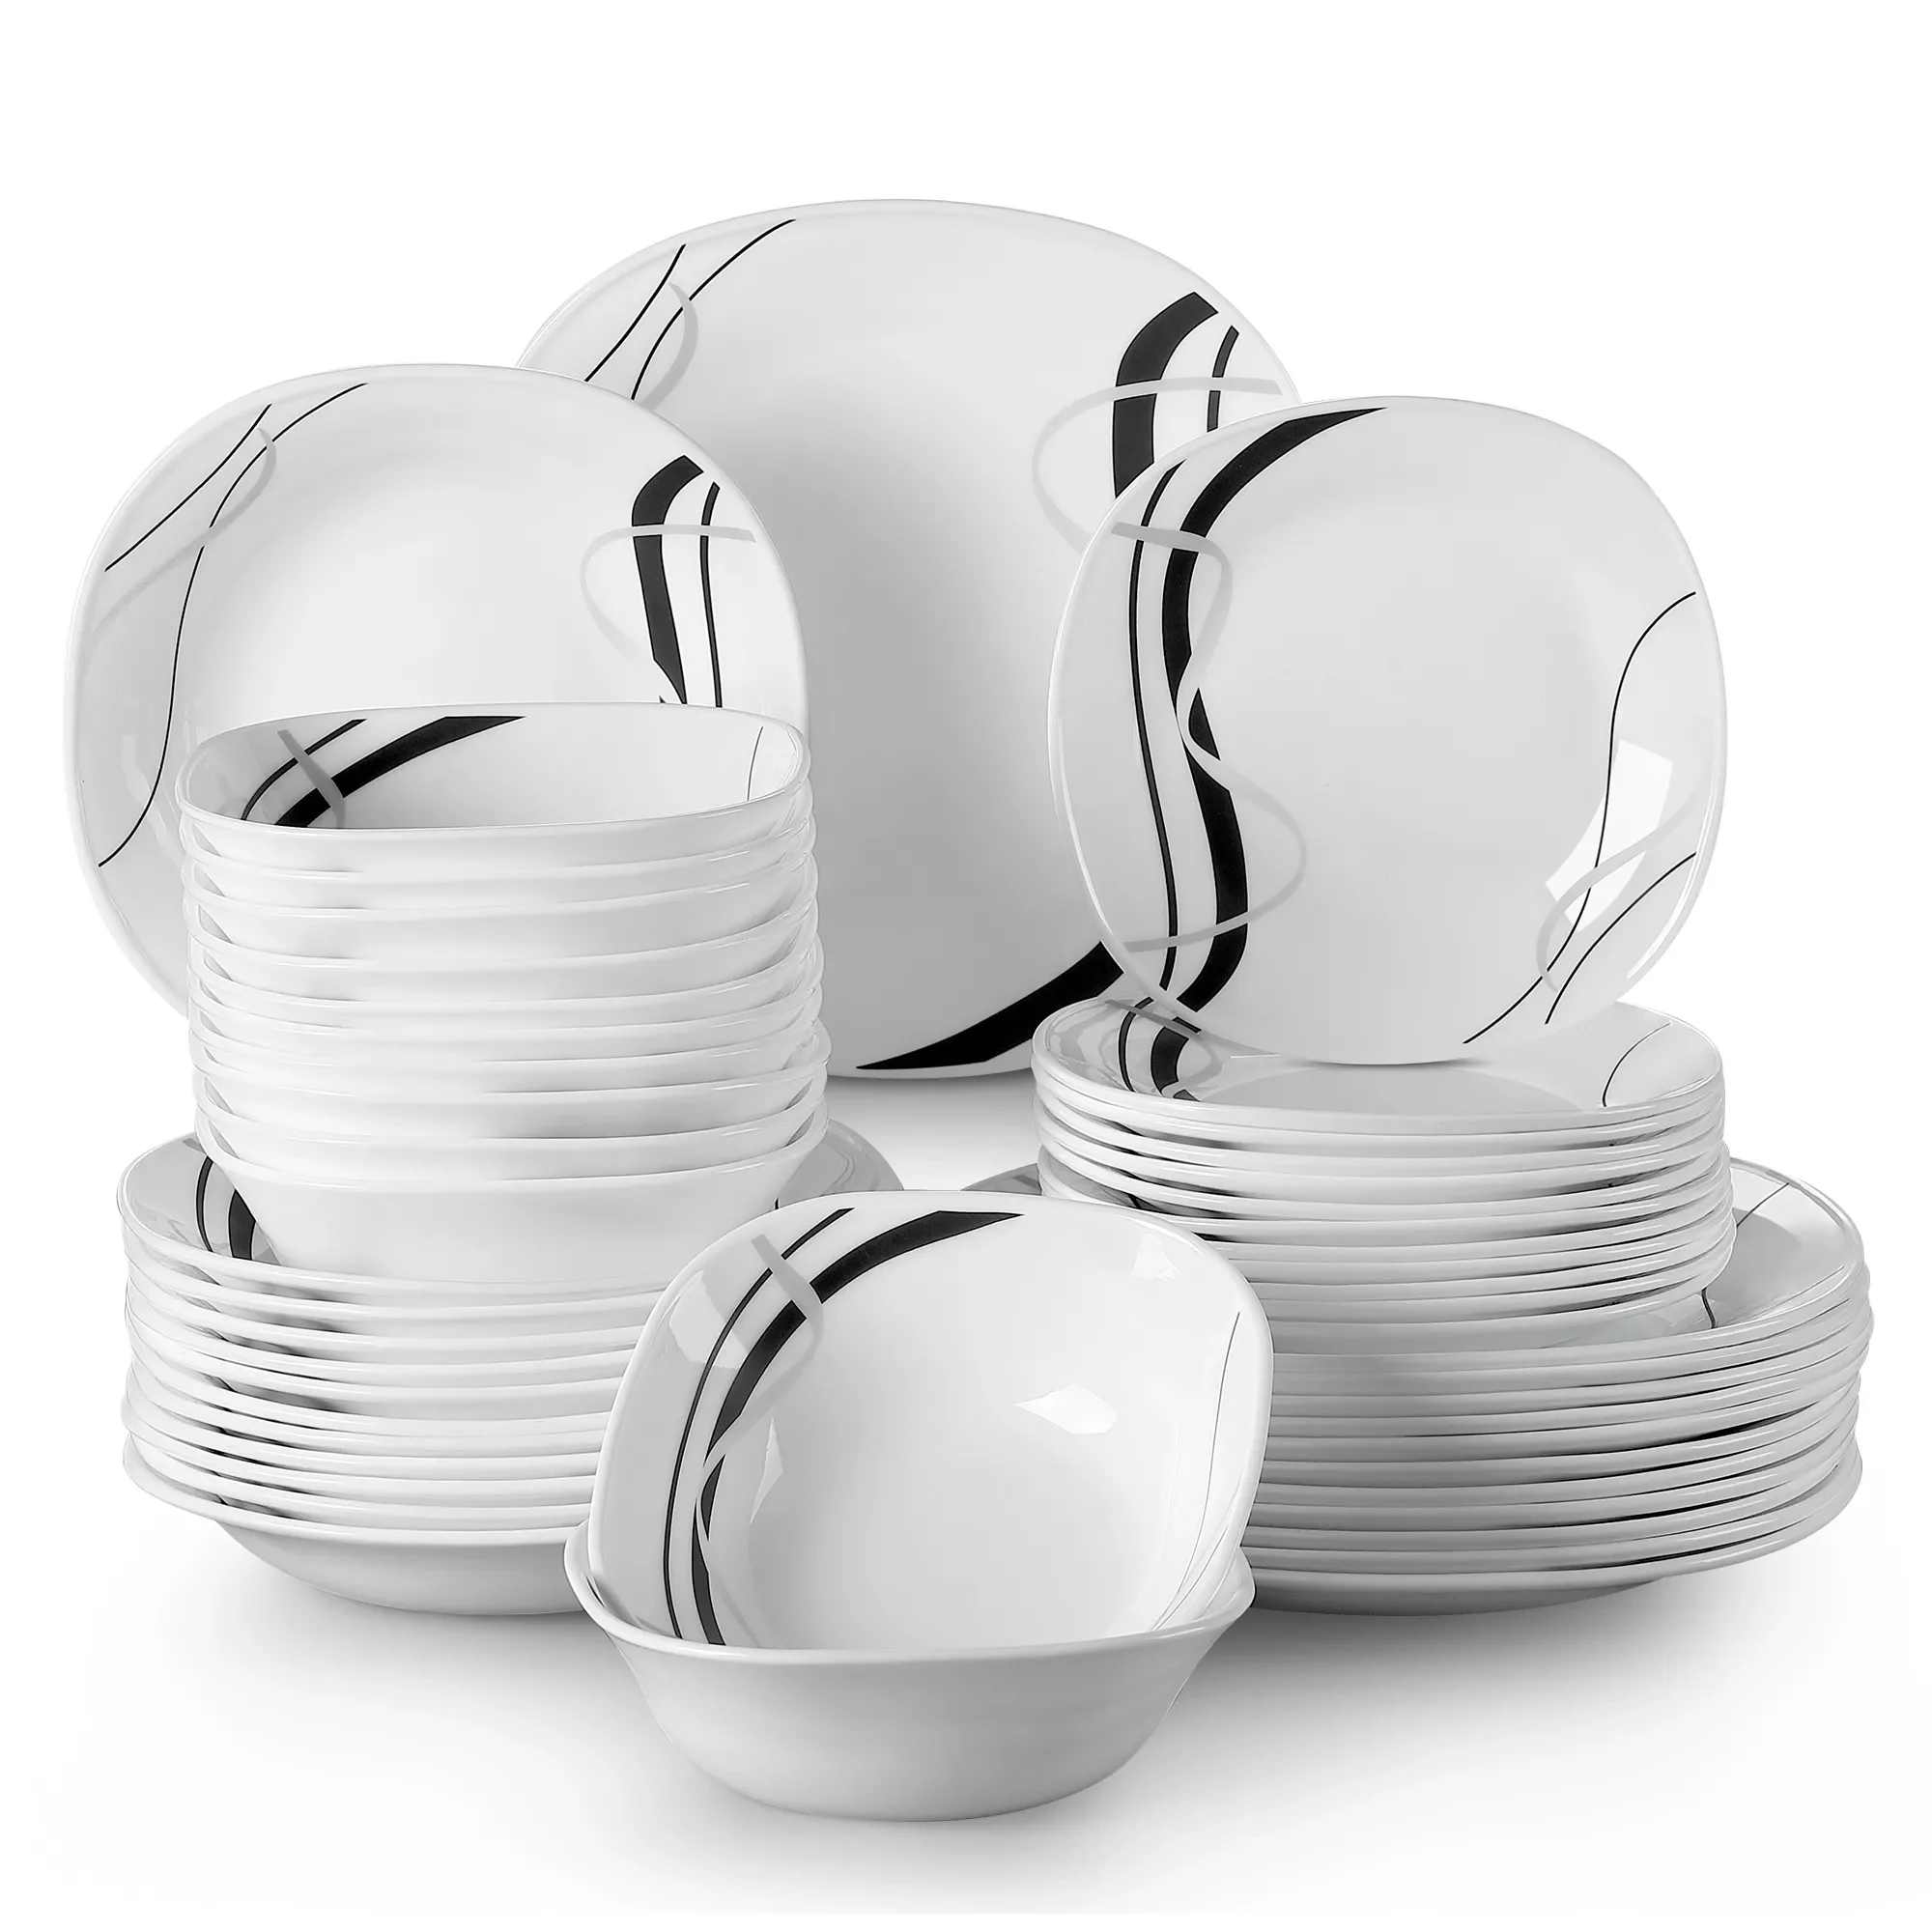 

FIONA 24/48-Piece Unbreakable Durable Opal Glassware Dinner Set with Dinner Plate,Soup Plate,Dessert Plate,Bowl Set